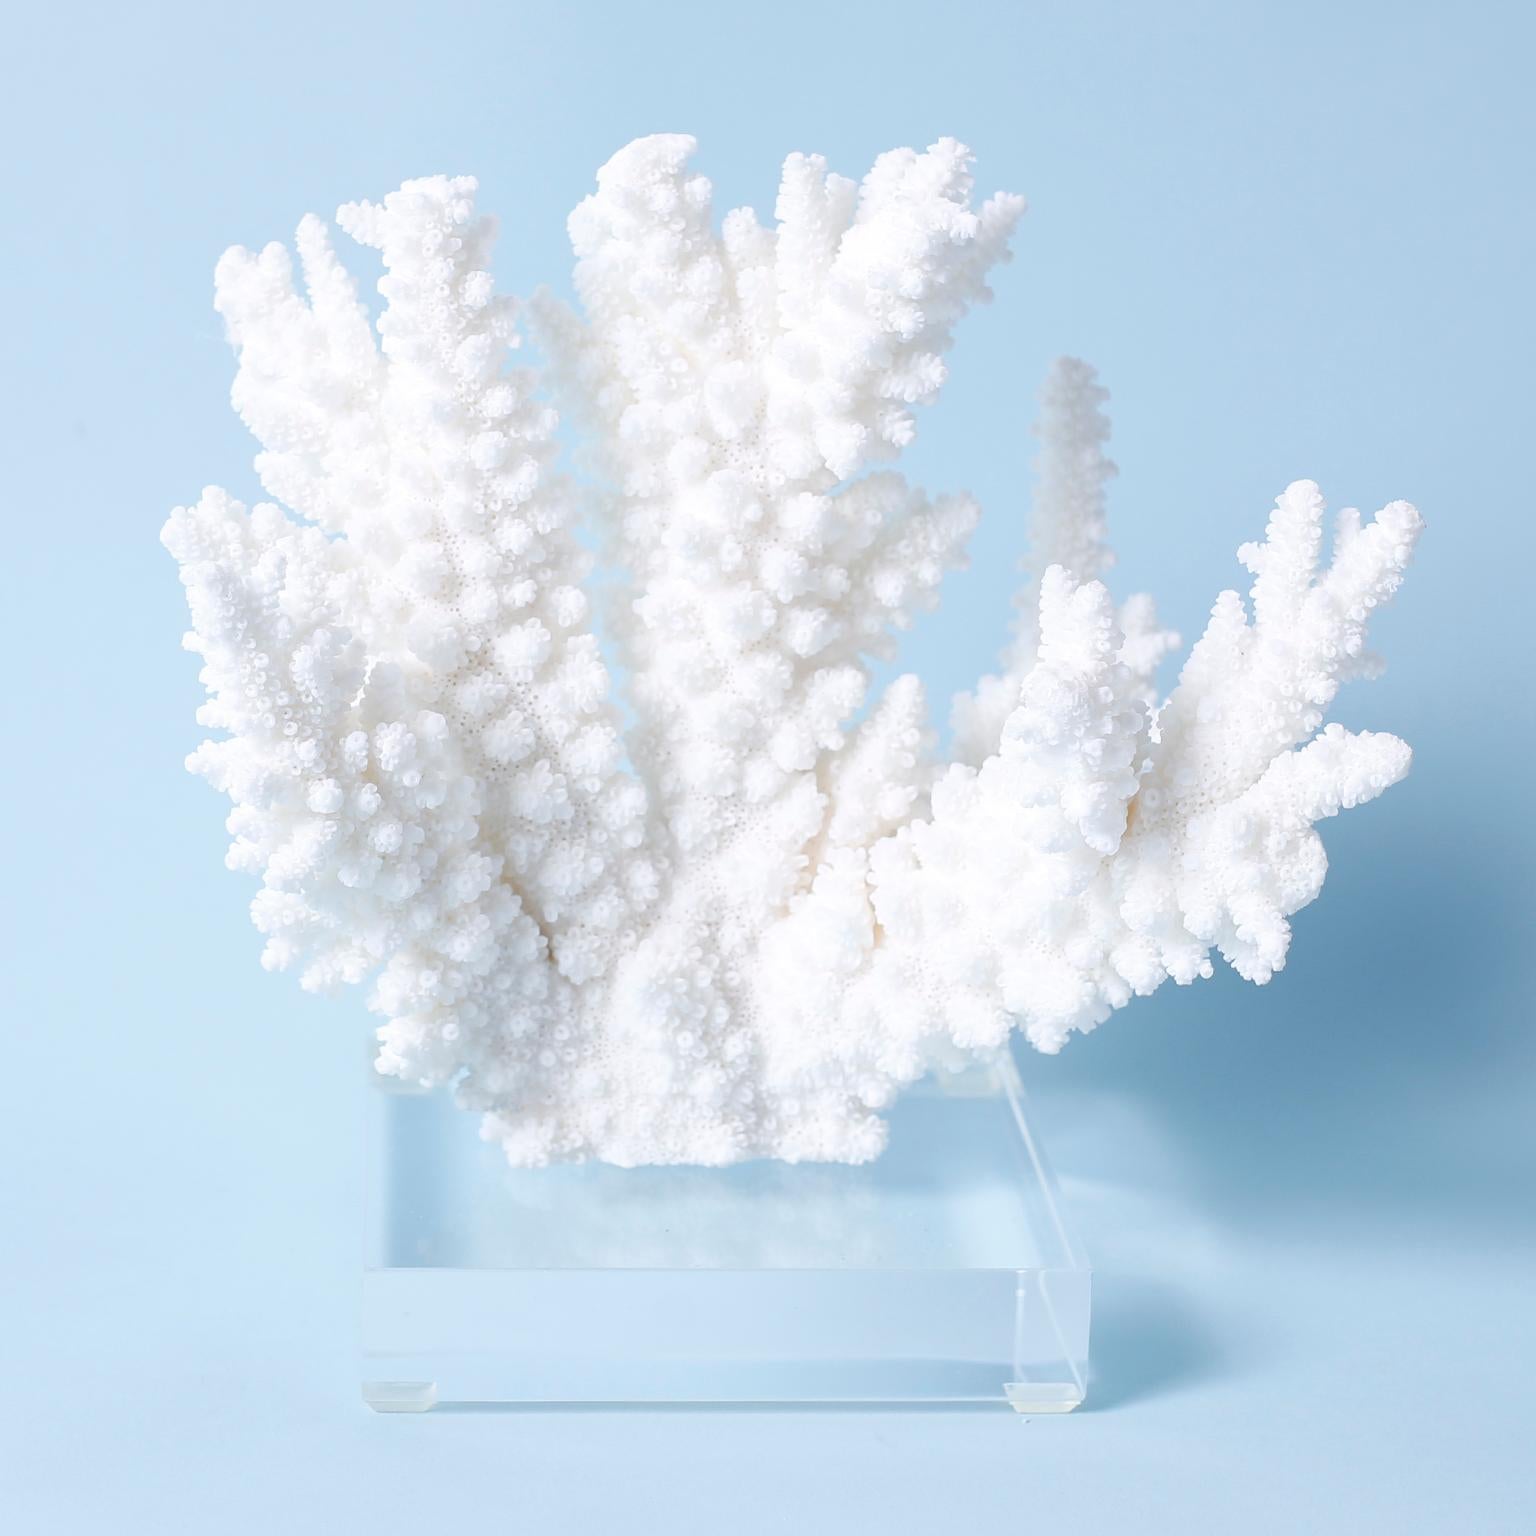 Three dramatic branch coral specimens each with its bleached white color and sea inspired form and texture, presented on Lucite bases to enhance their sculptural elements. 

Please note that coral cannot be exported out of the USA without a Cities